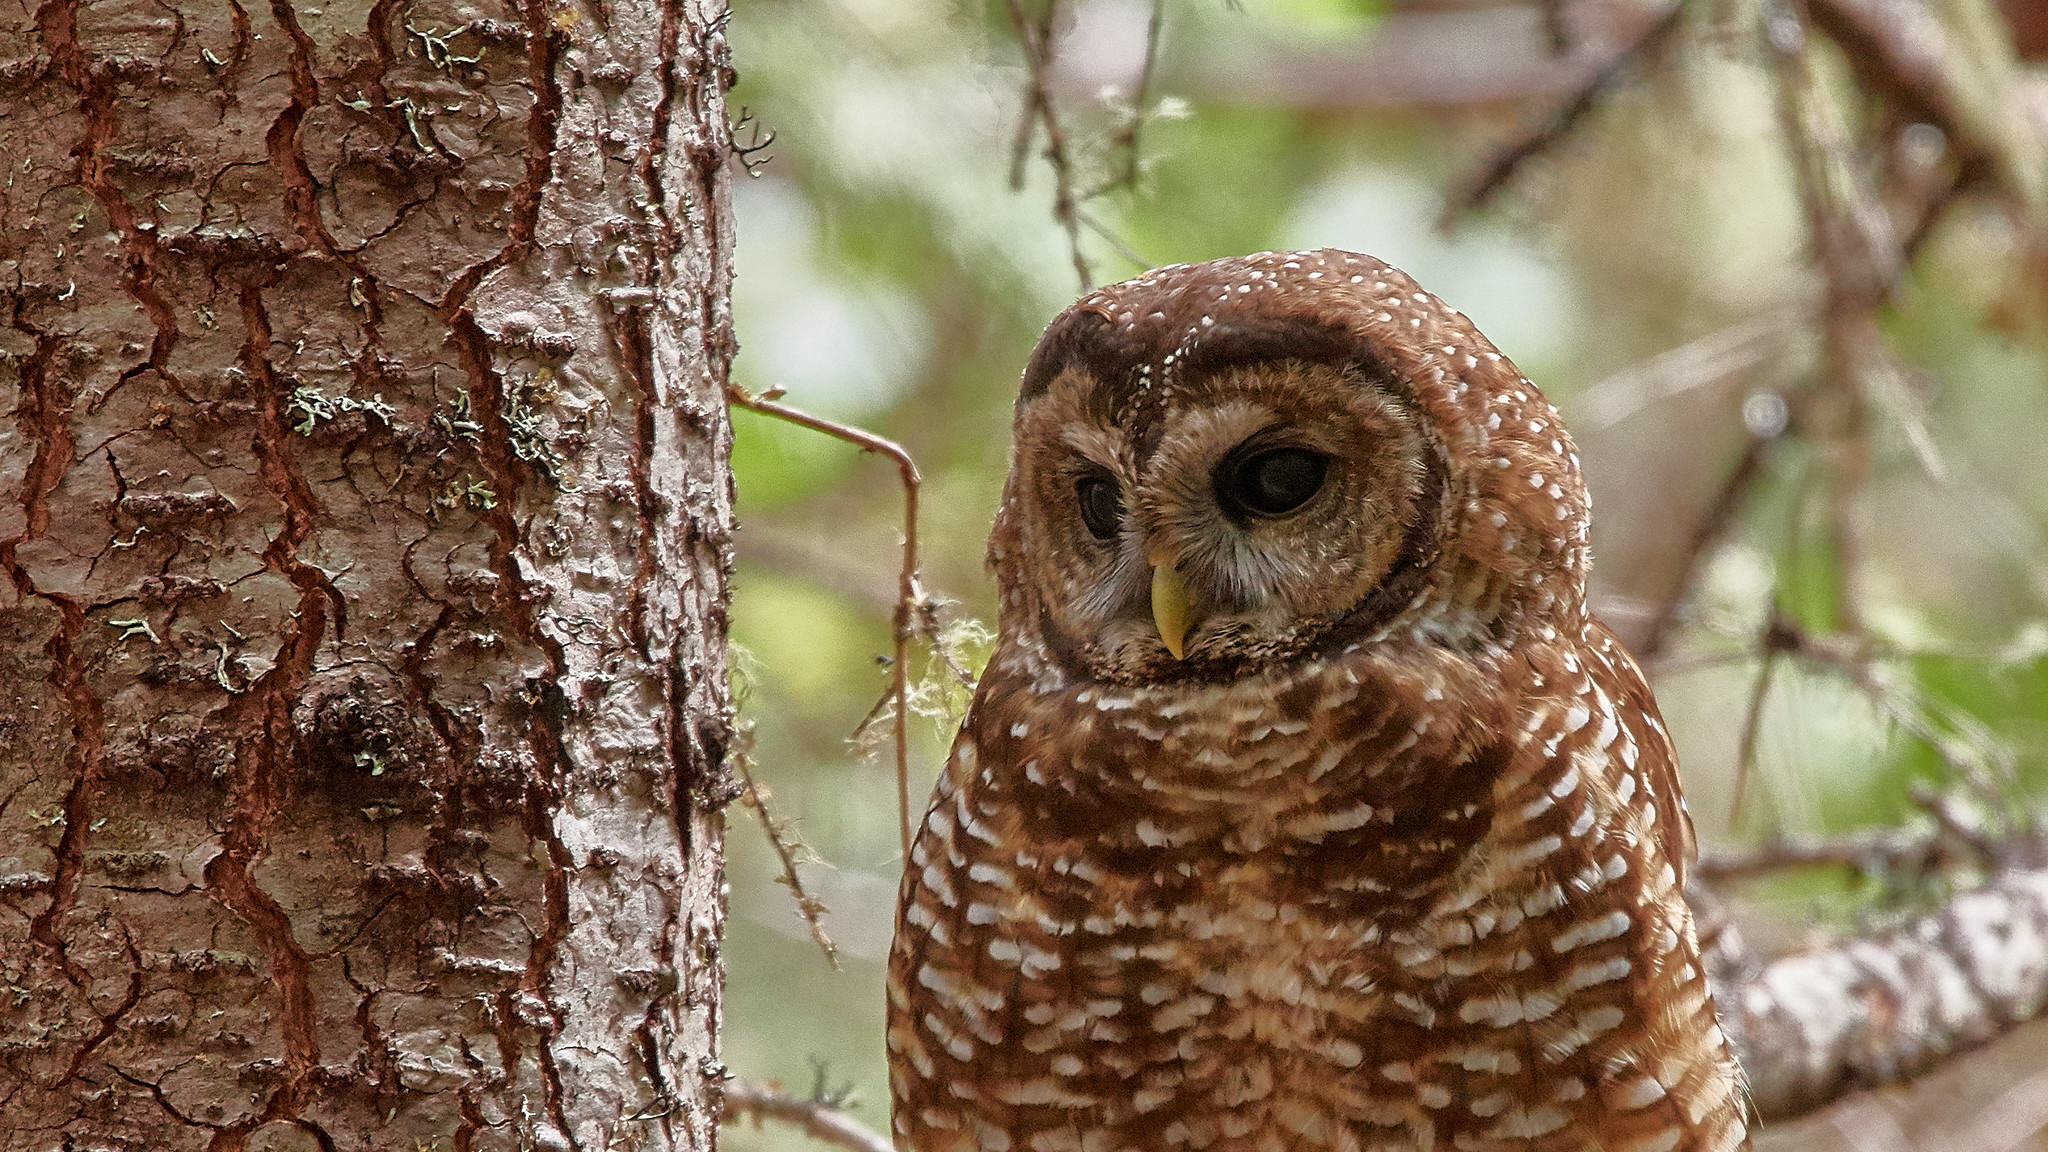 B.C. Spotted Owl